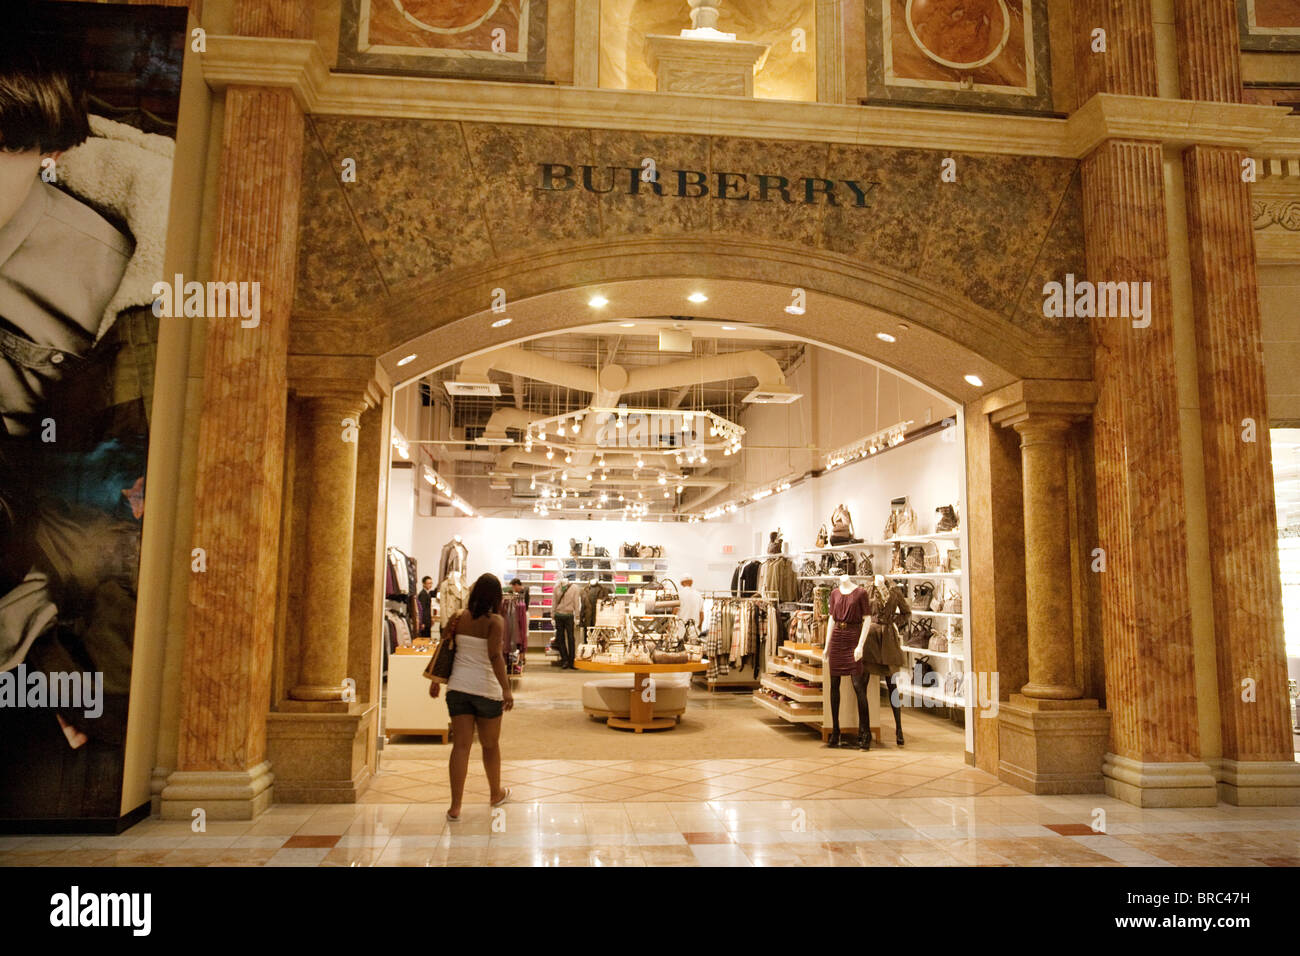 The Burberry store in the Forum Shops, Caesars Palace Hotel, Las Vegas USA Stock Photo